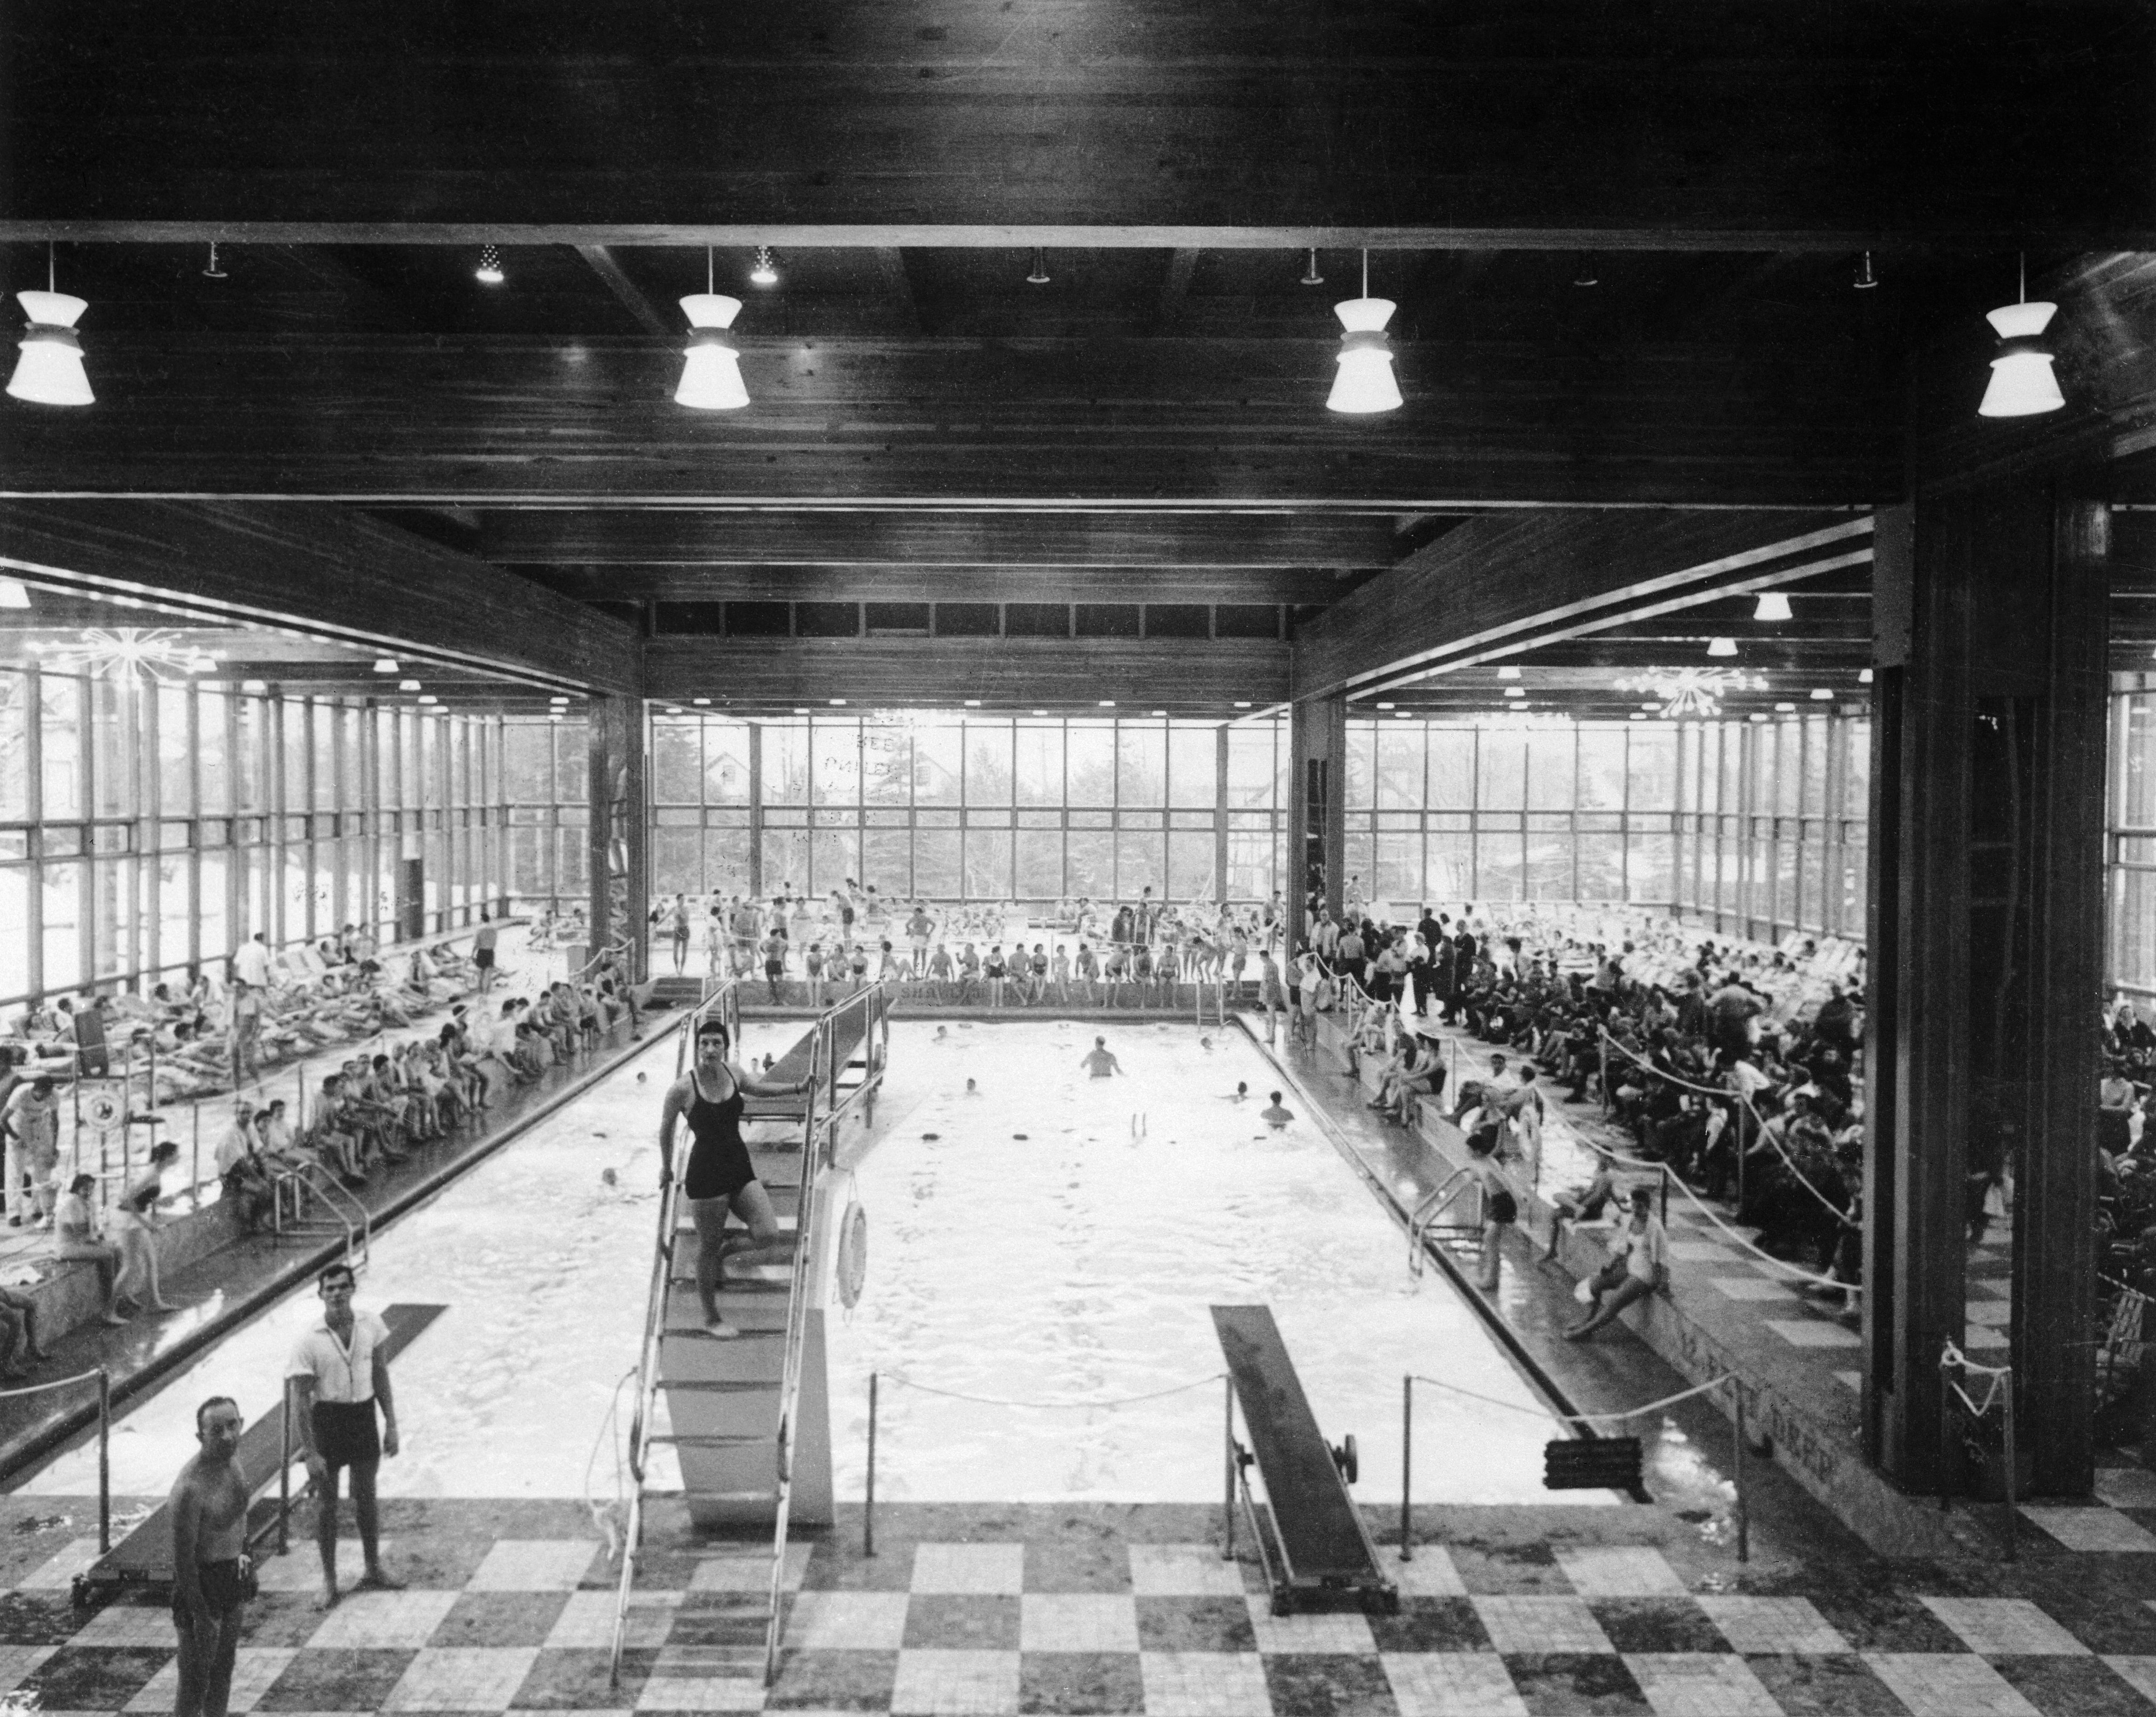 A black and white photo circa 1960 shows a woman in a black one-piece bathing suit and swim cap standing on the stairs to a diving board overlooking an enormous indoor swimming pool at Grossinger's resort in the Catskills. The deck of the pool around her is packed full of vacationers, some sitting upright in chairs just on the edge of the pool and some lounging on deck chairs further back. The cavernous room has glass walls looking out on the grounds and a checkerboard tiled floor.